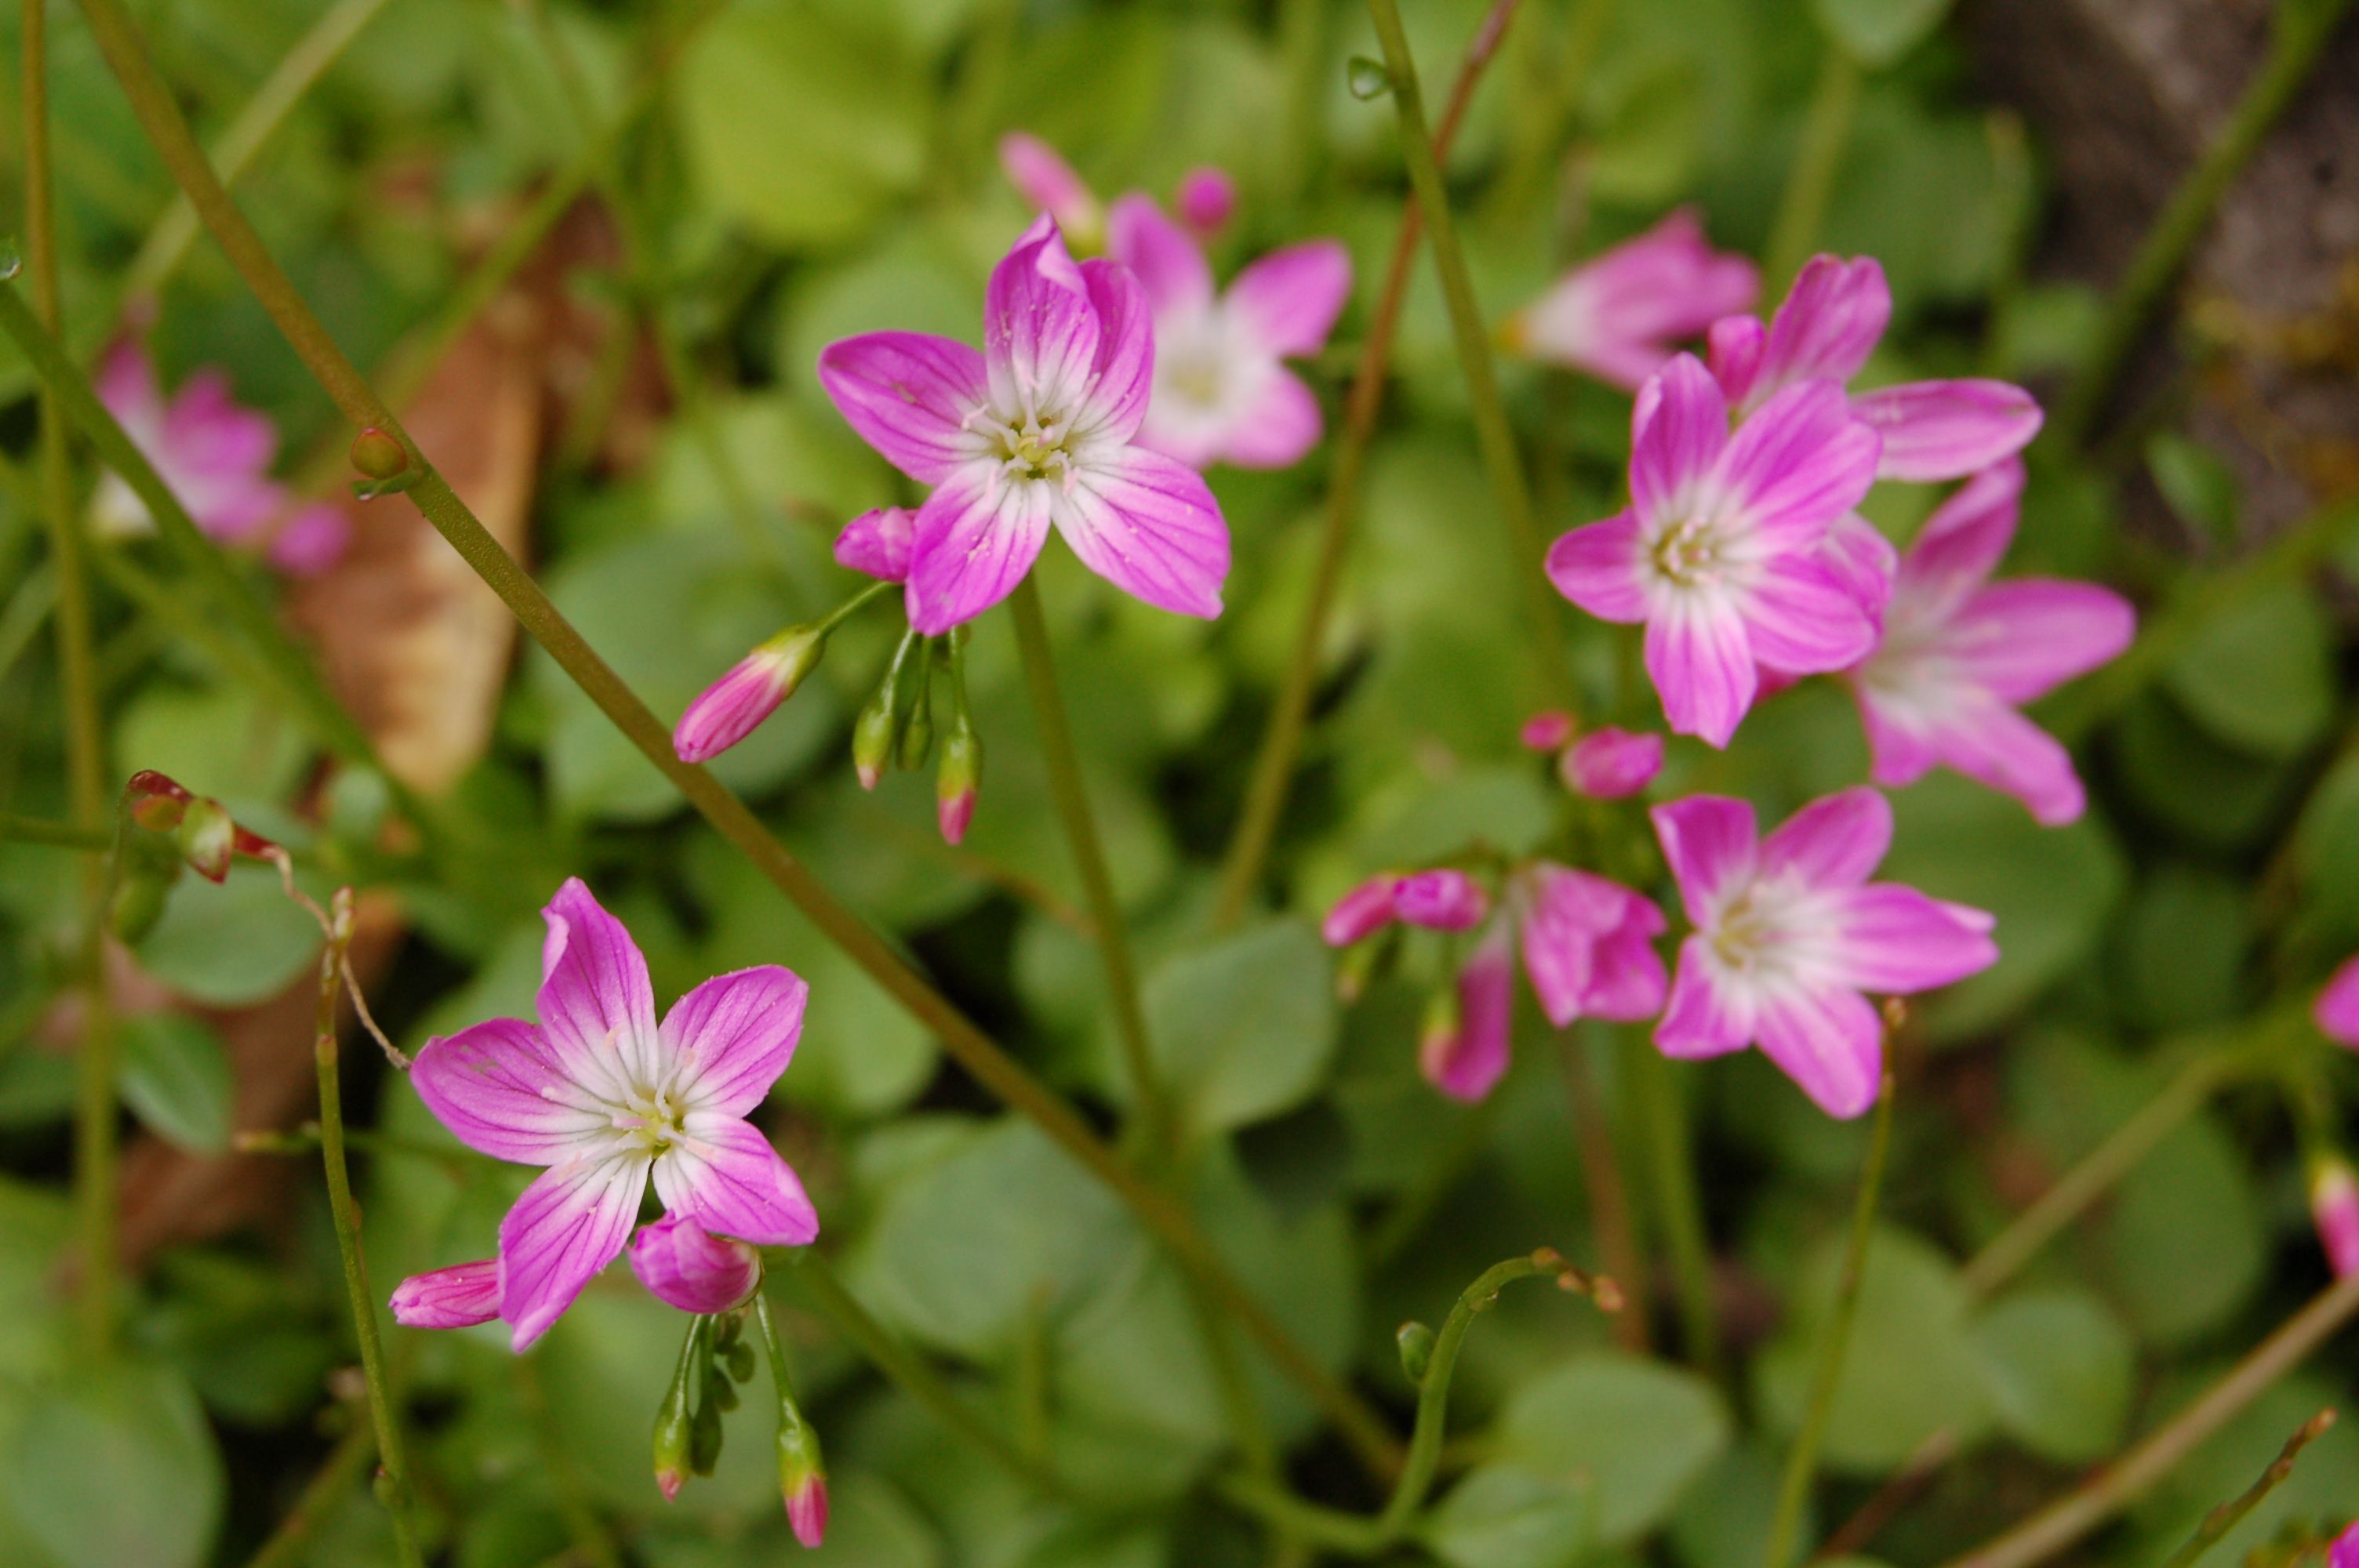 Small pink flowers with green leaves growing in the ground.